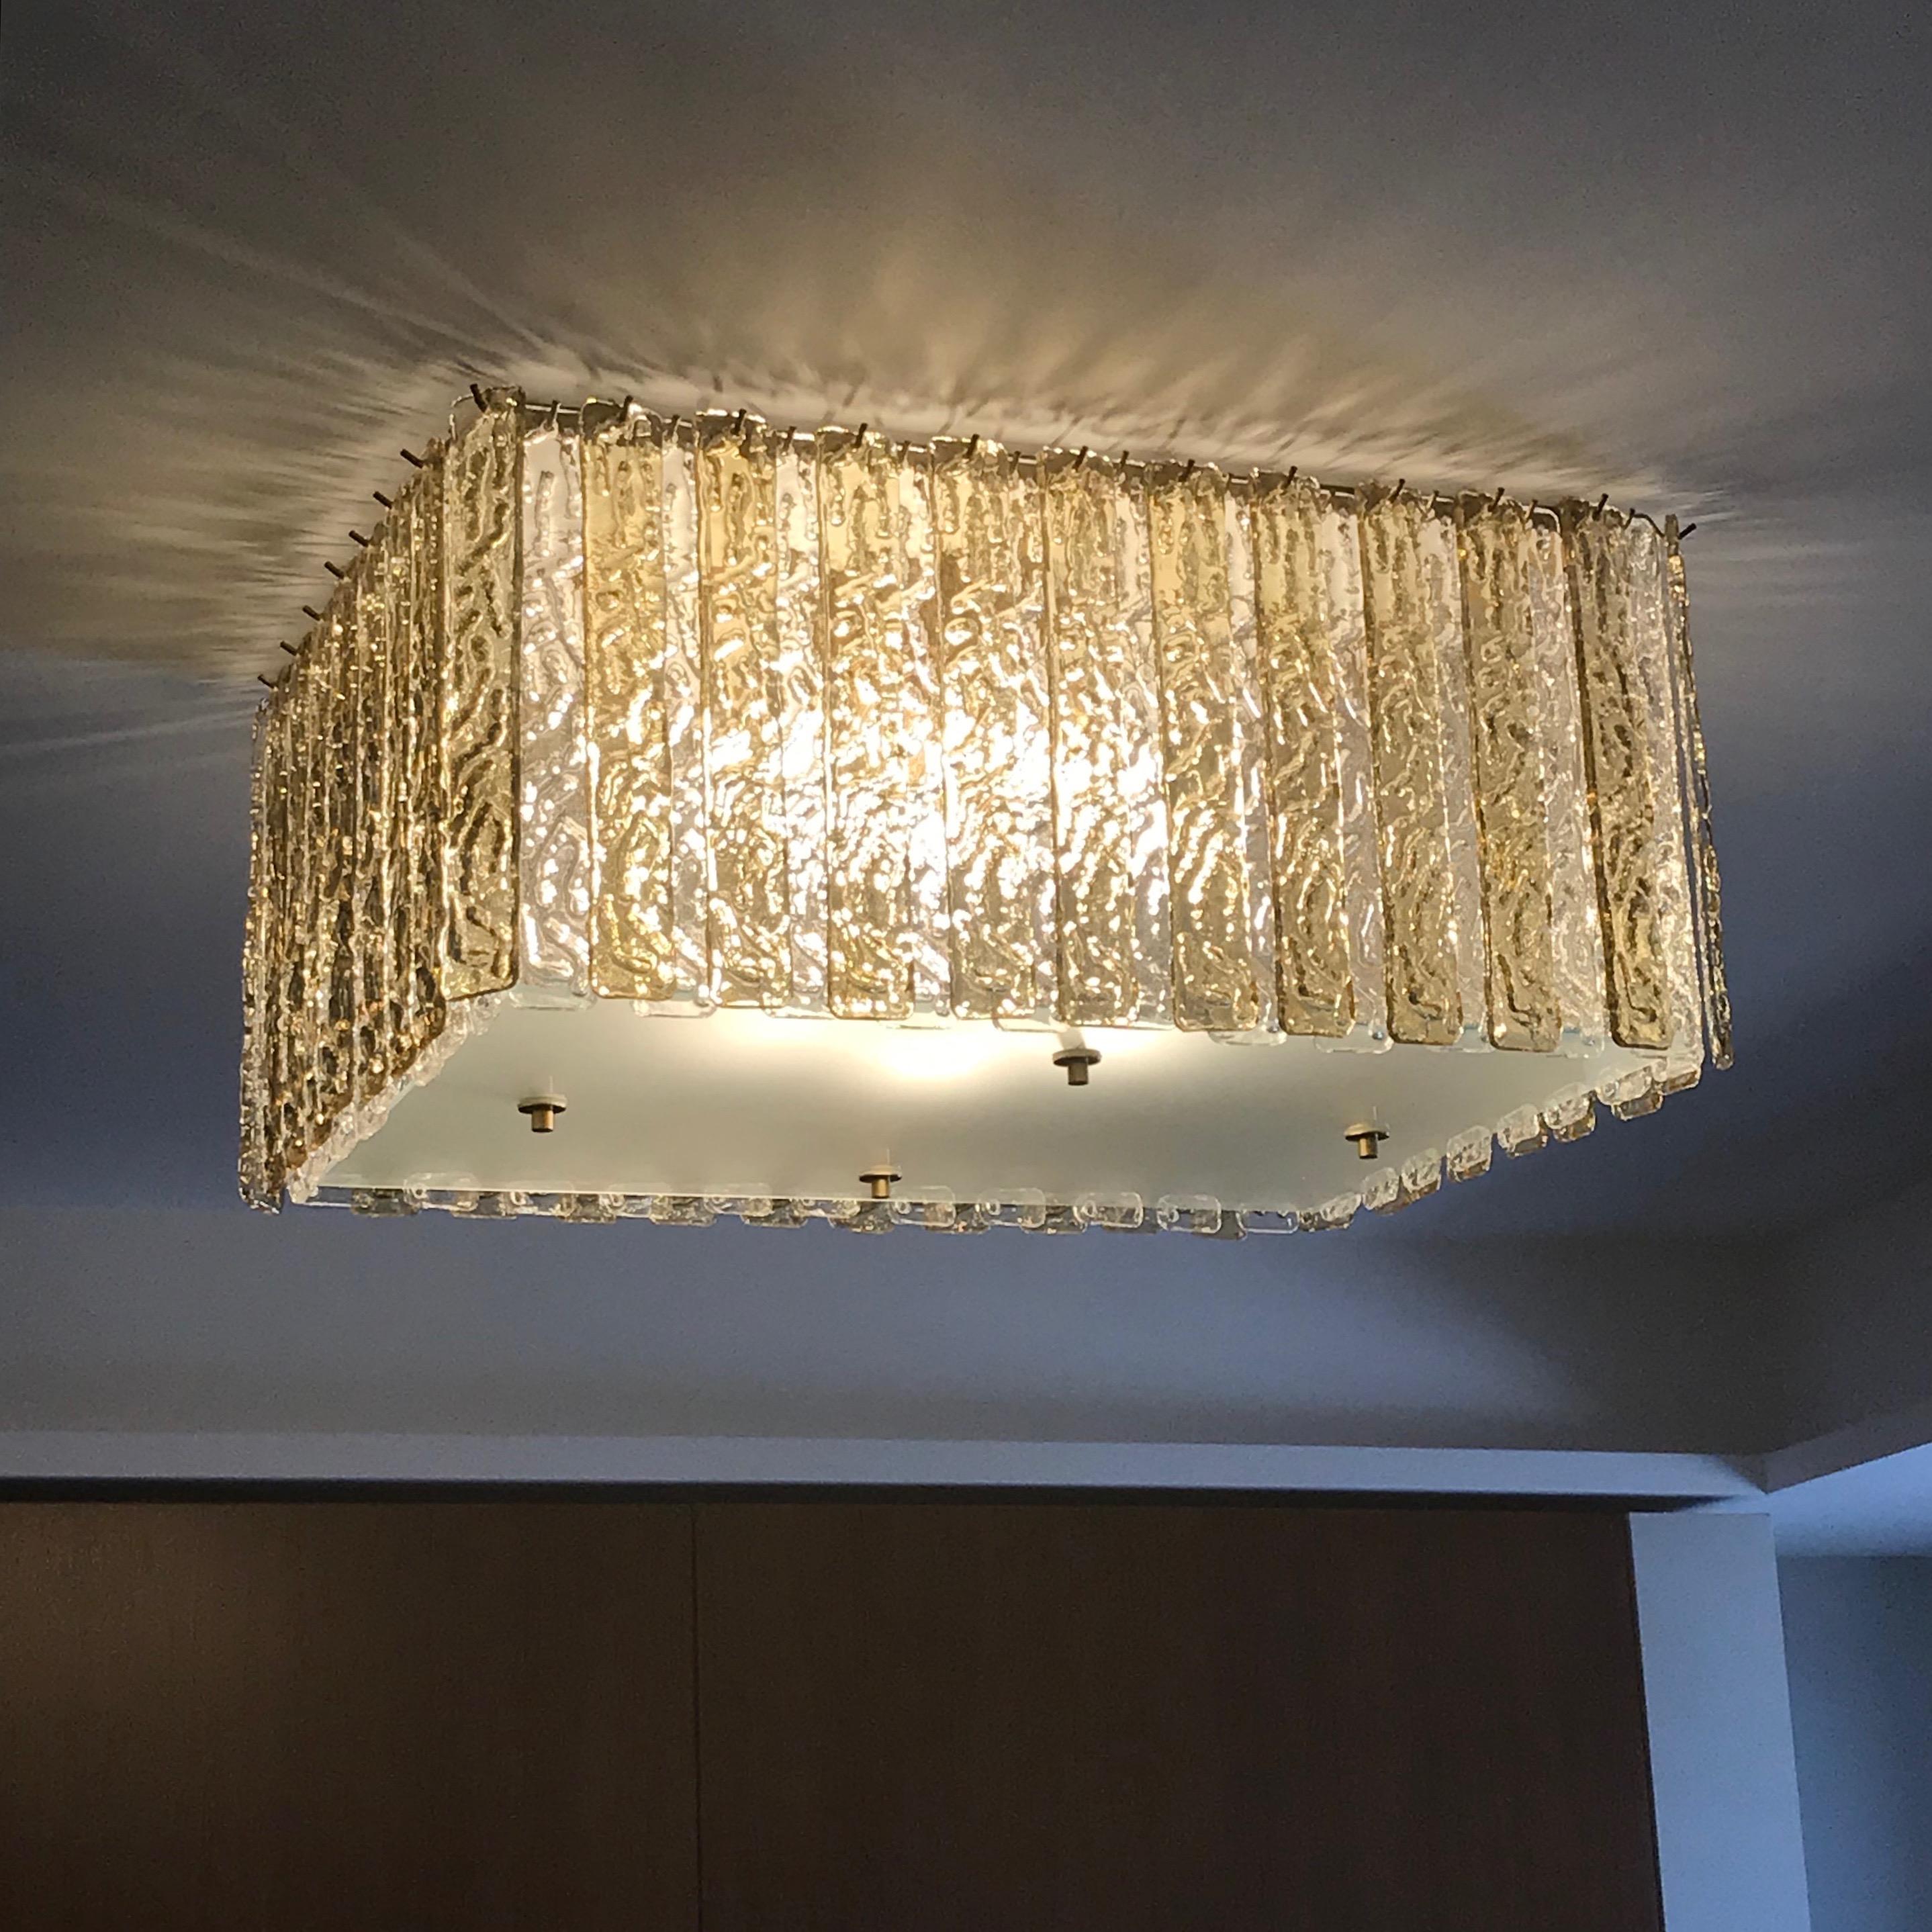 Bespoke Italian modern Art Deco design, entirely handcrafted in Italy, chandelier customizable as flush mounts or pendants, here with a brass structure in a geometric rectangular shape, highlighted by the decor of alternate plates in gold amber and